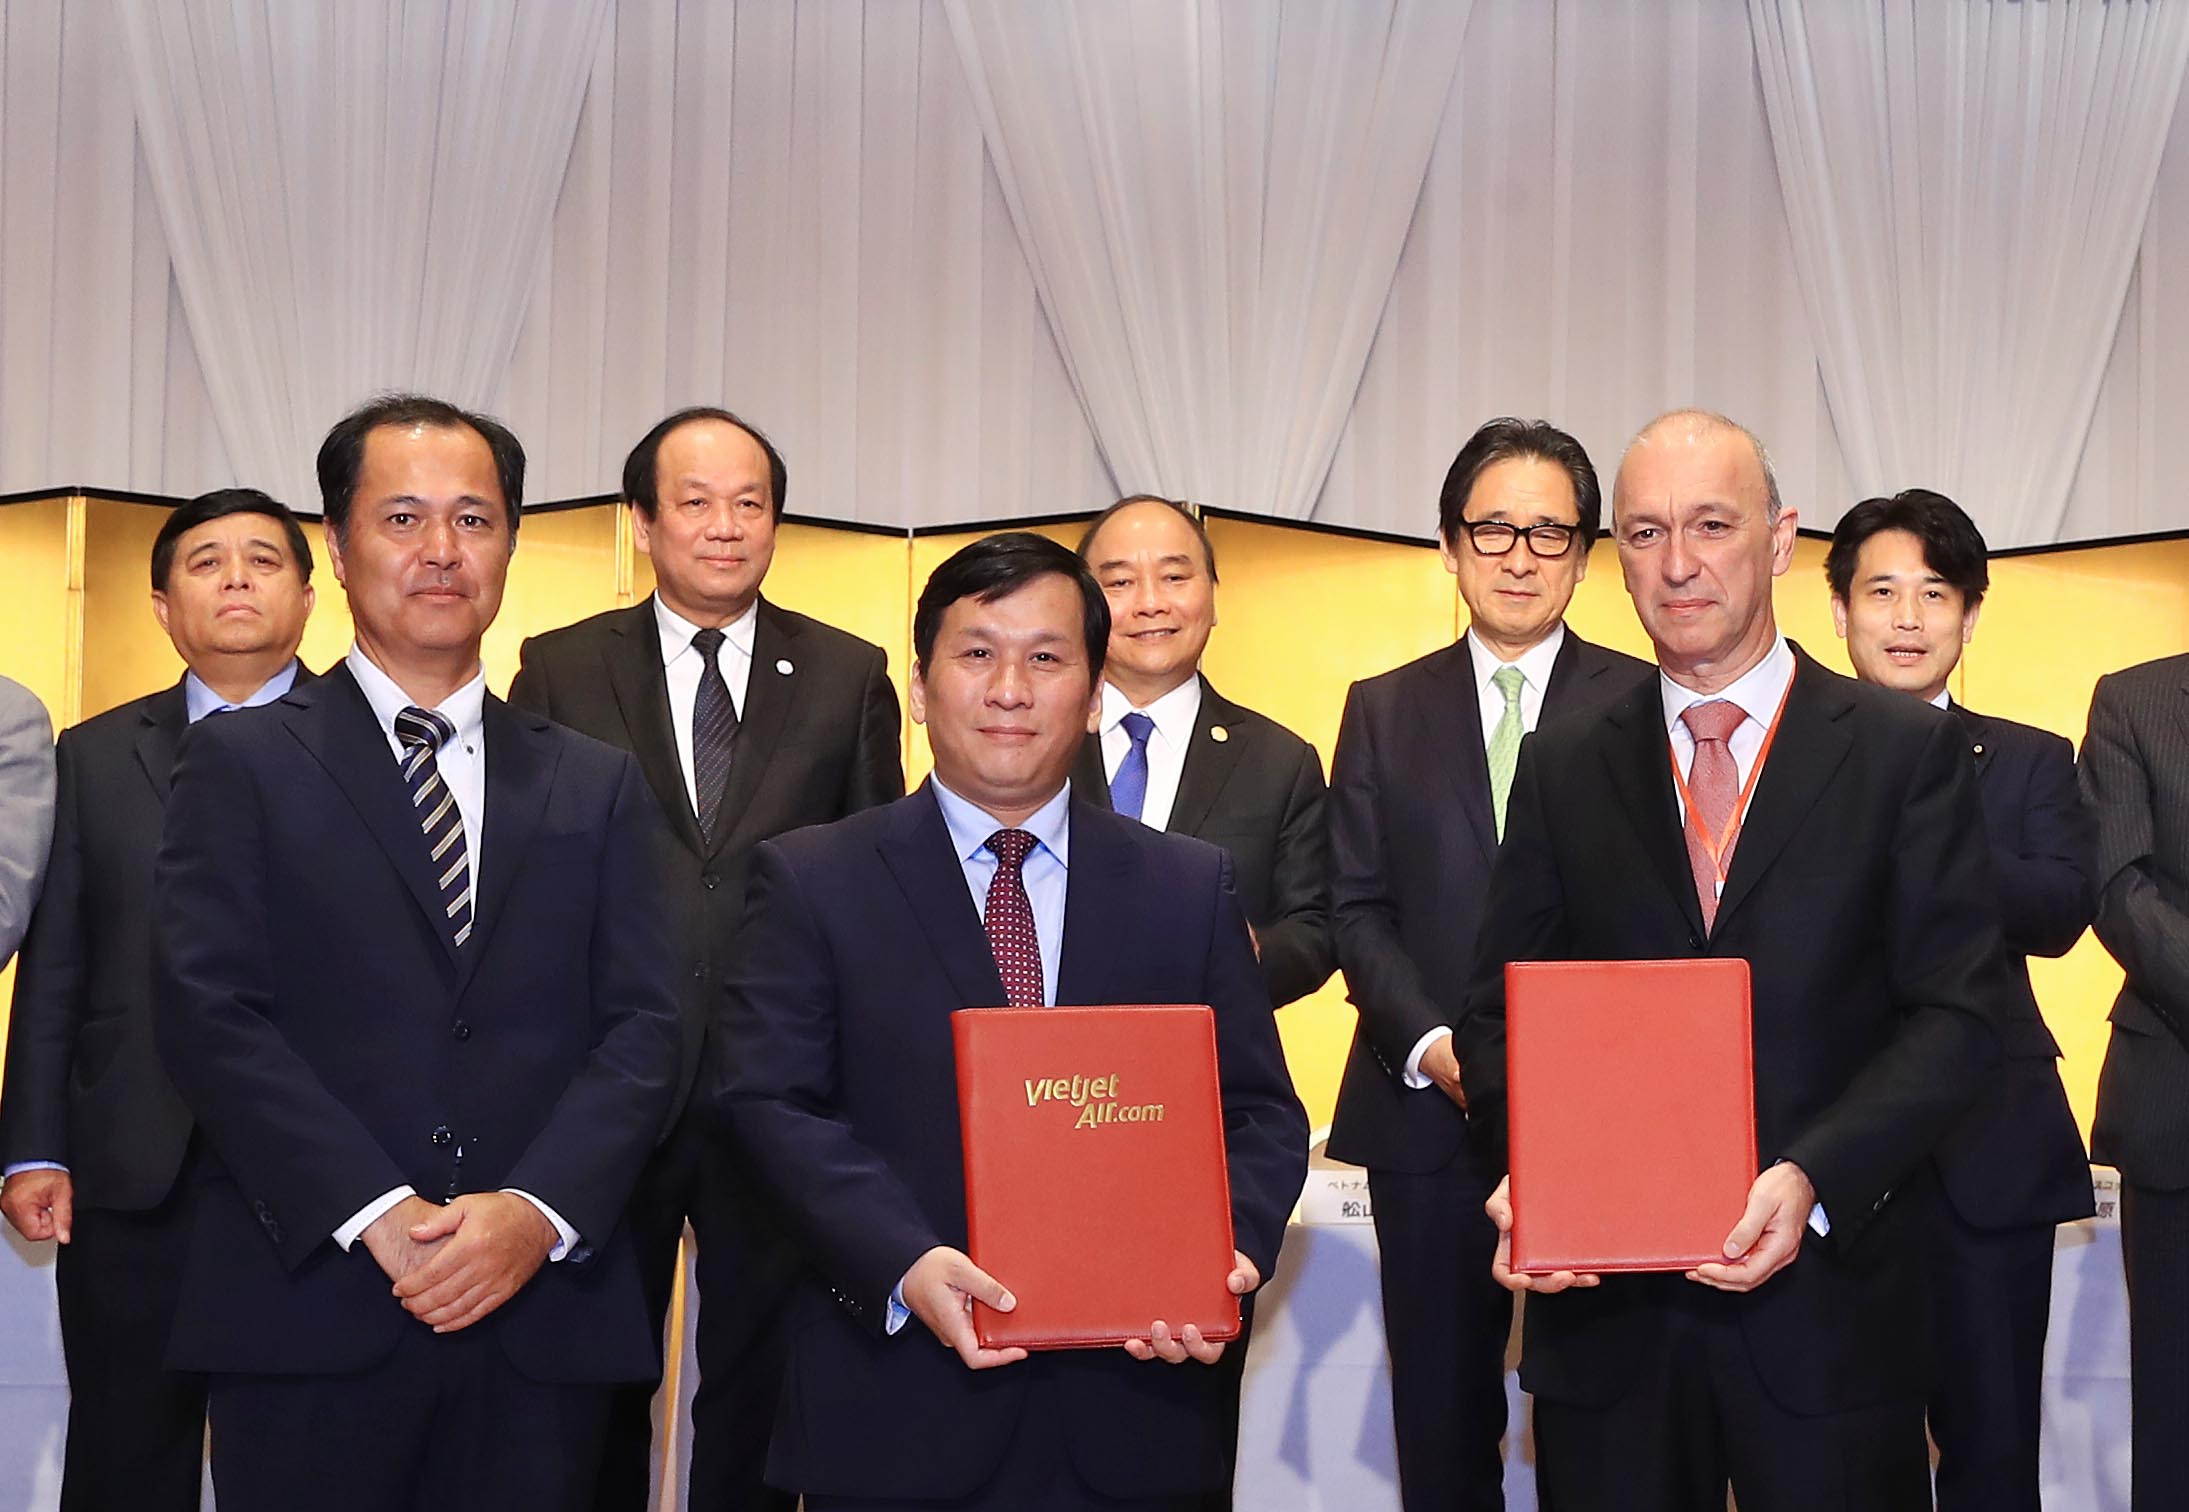 Vietjet Vice President Dinh Viet Phuong (1st row, center) exchanges the aircraft financing agreements with the representatives of Japanese companies. Photo: Vietjet